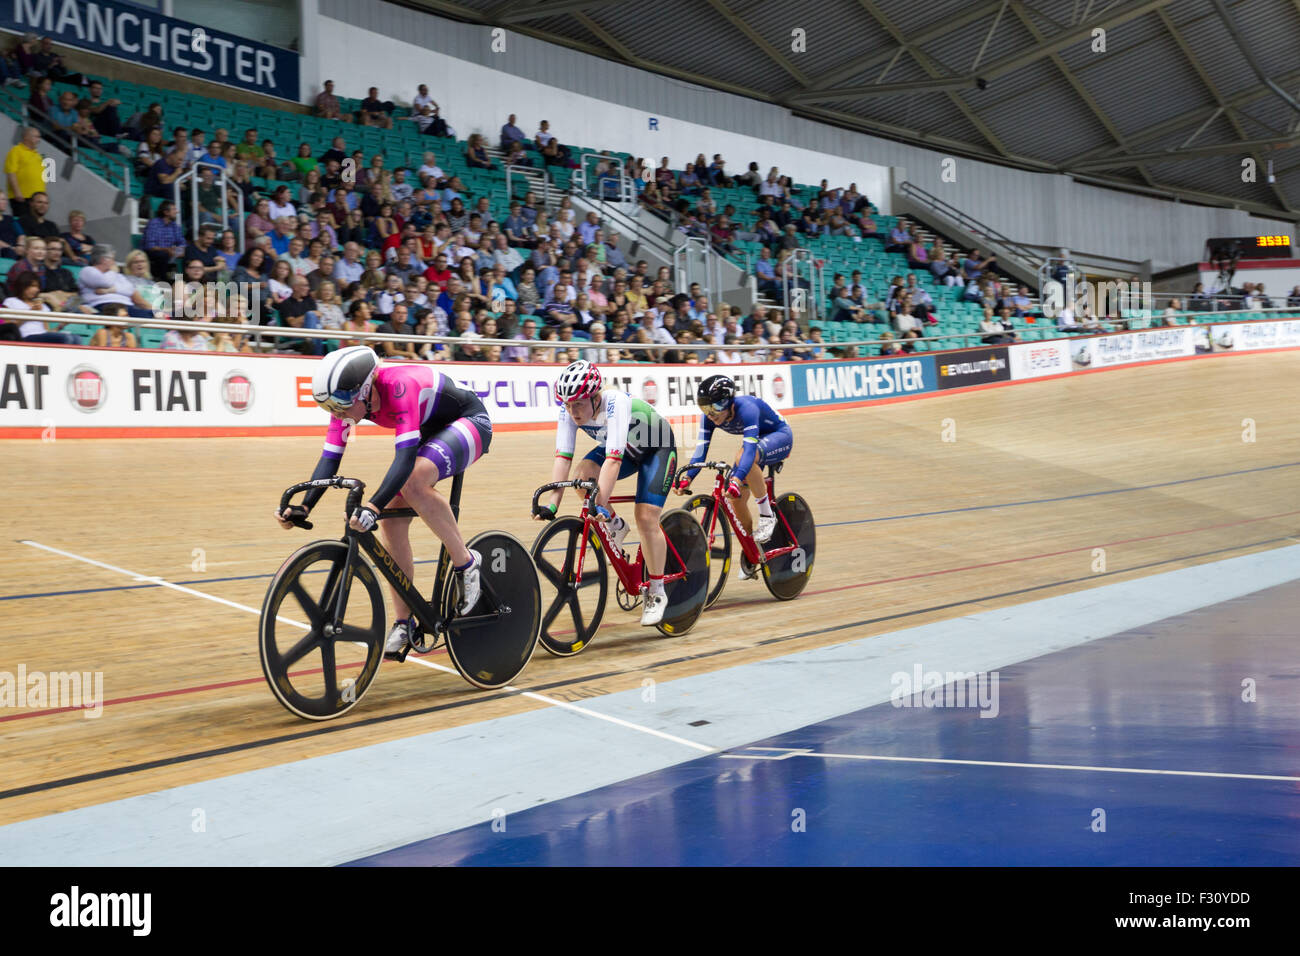 Manchester, UK. 27th Sept, 2015. Laura Trott (blue) wins Gold in the Points race during the 2015 British Cycling National Track Championships at the National Cycling Centre. Second place to Katie Archibald (pink) and third, Emily Kay. Credit:  Michael Buddle/Alamy Live News Stock Photo